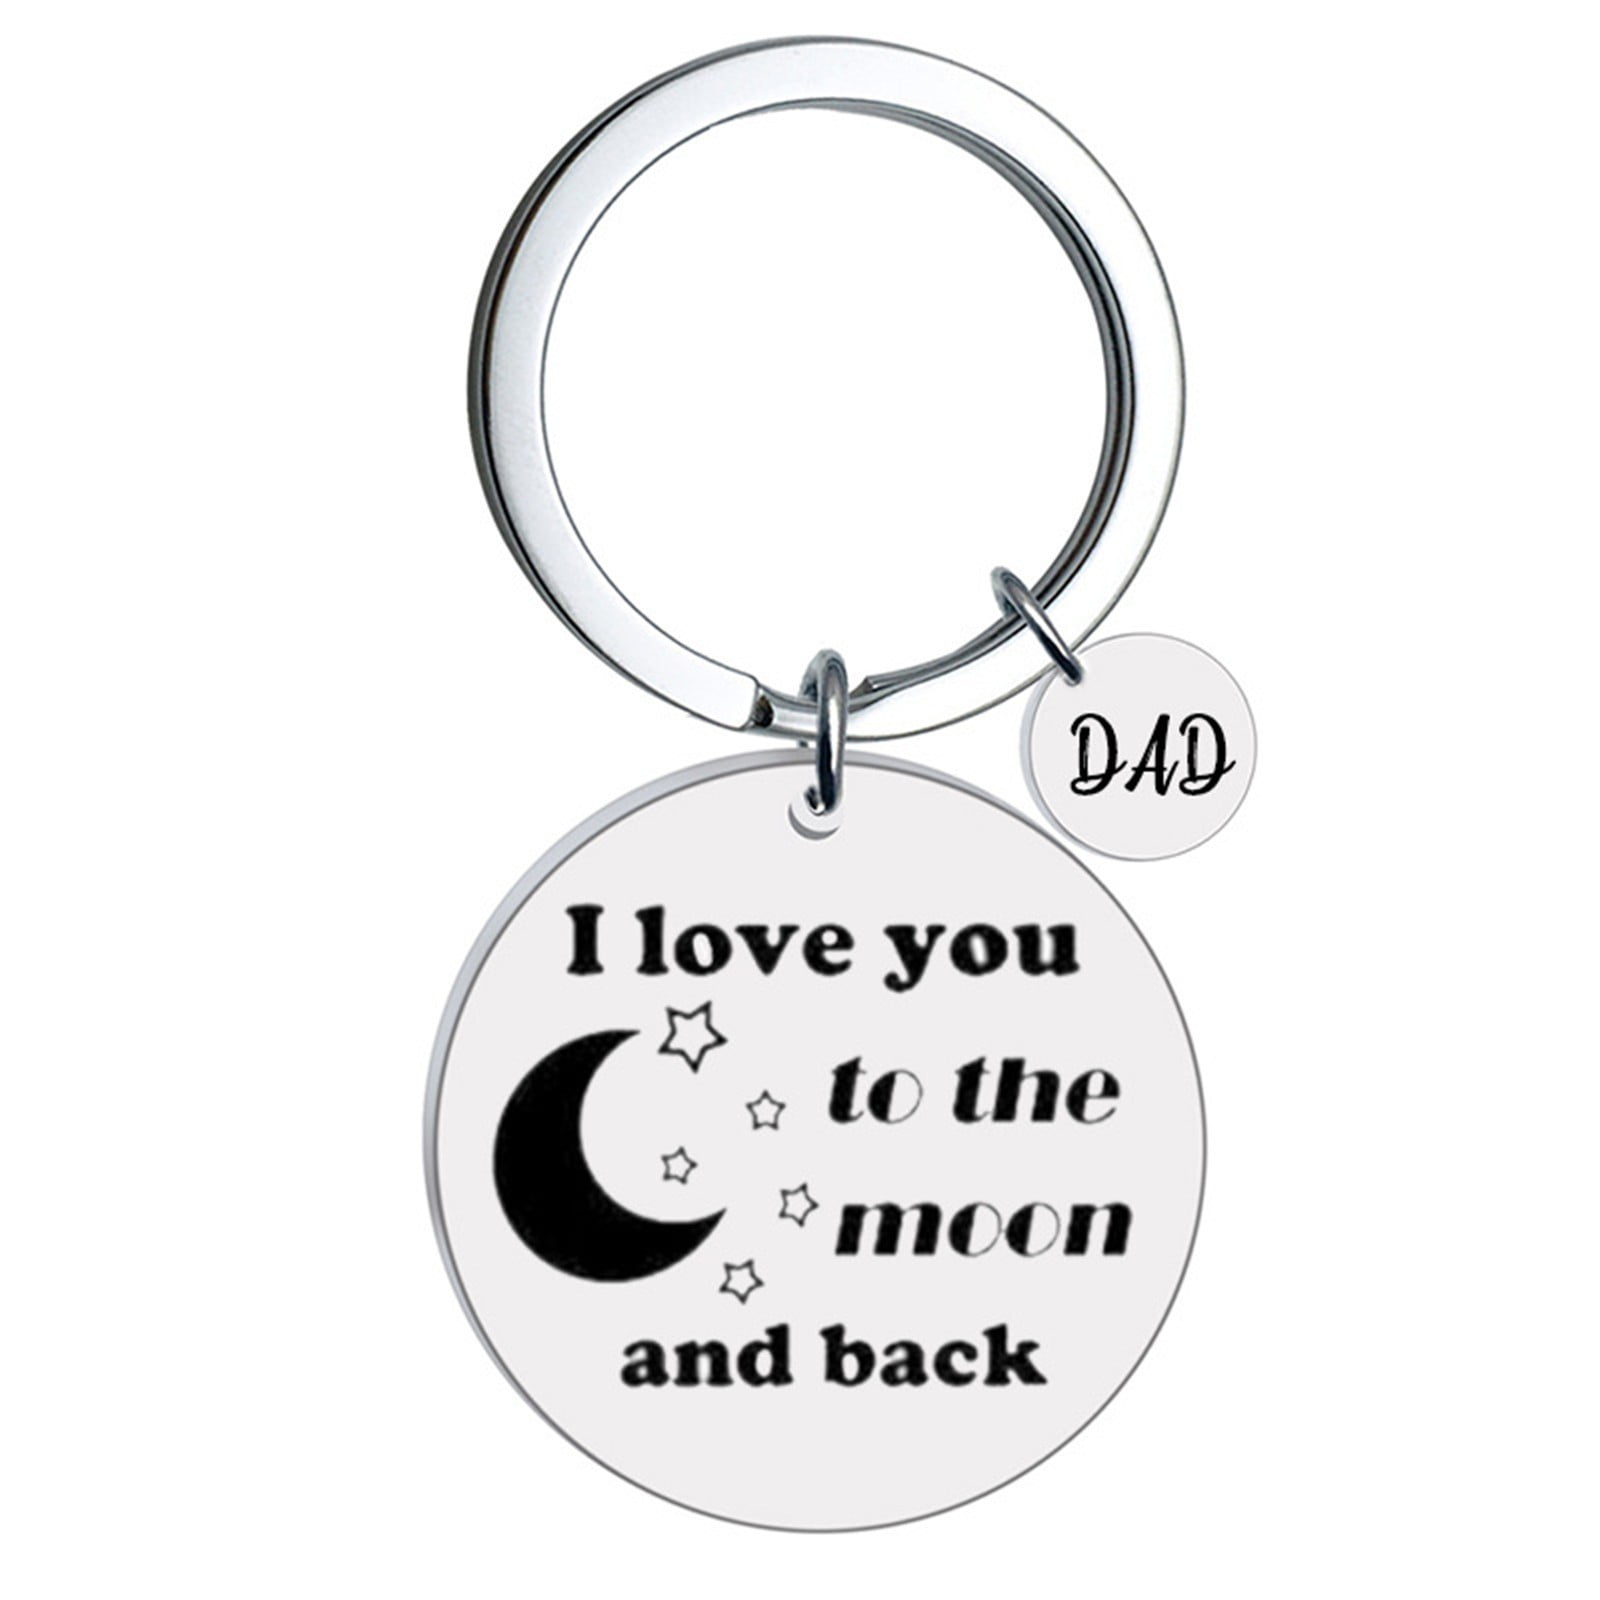 Papa I Love You To The Moon And Back Bottle Opener Stainless Steel Key Chain 